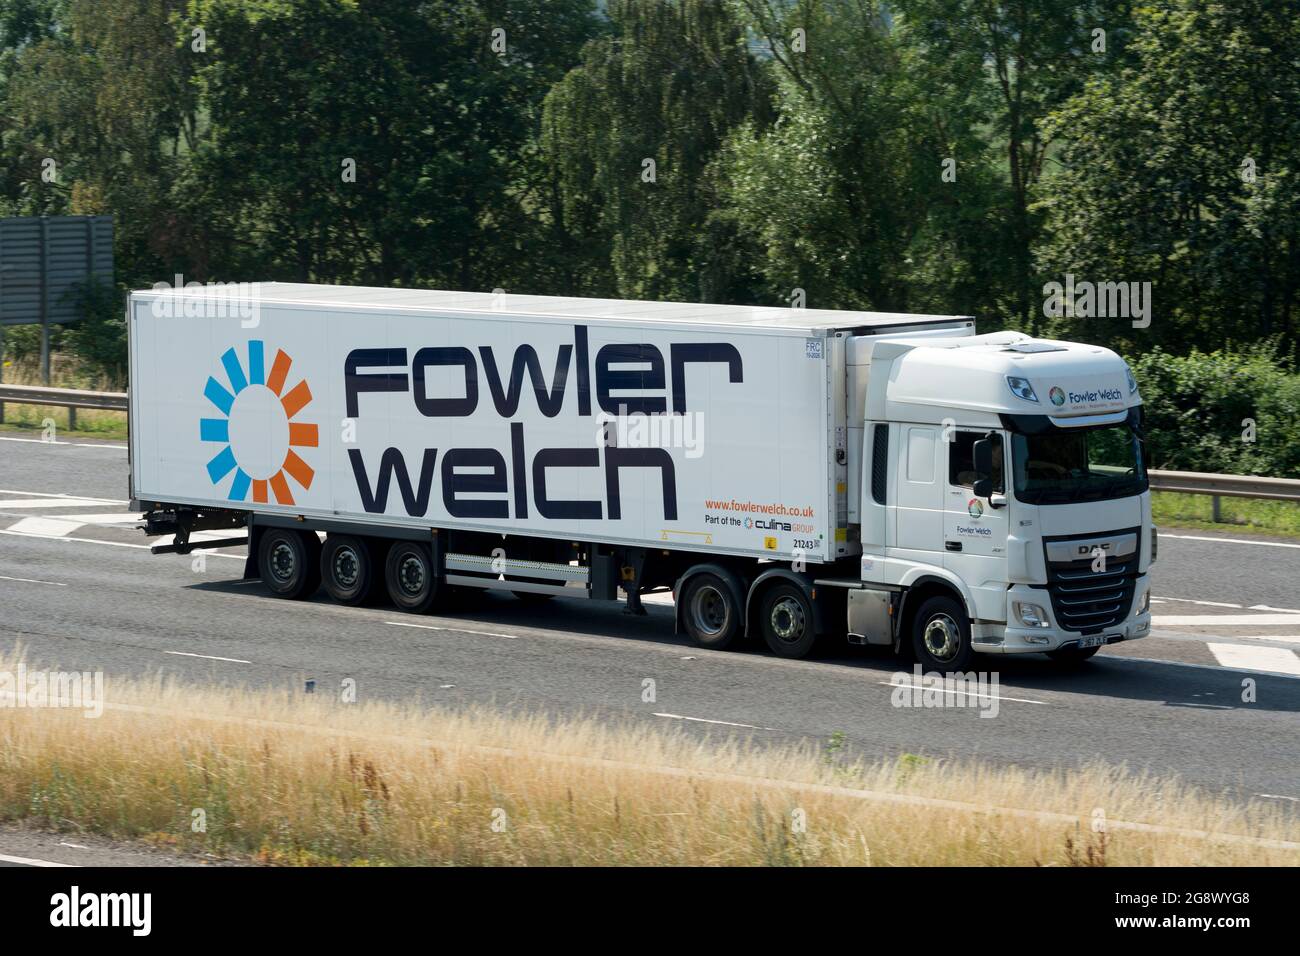 A Fowler Welch lorry on the M40 motorway, Warwickshire, UK Stock Photo